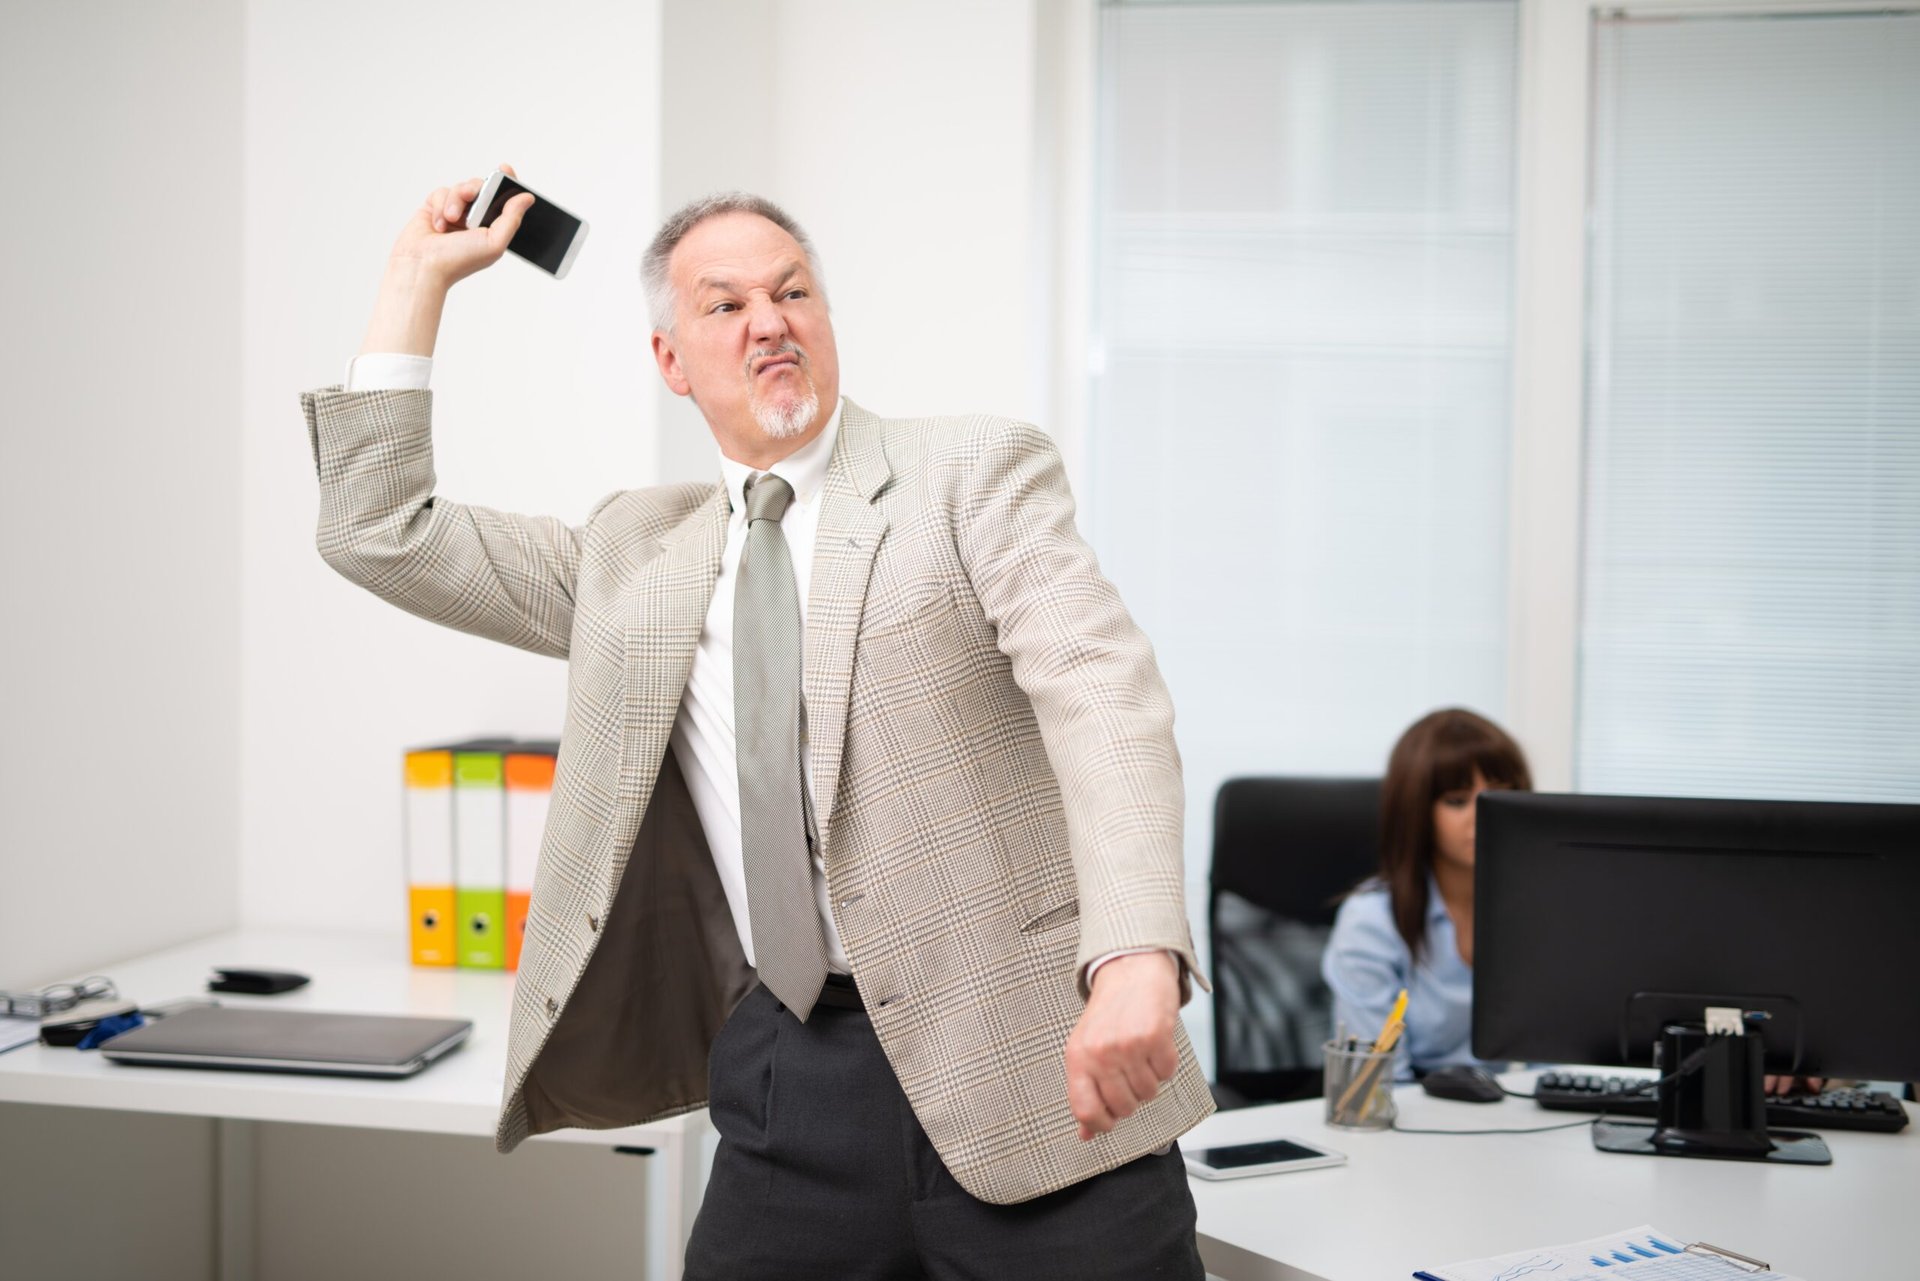 Angry man in the office throwing his phone